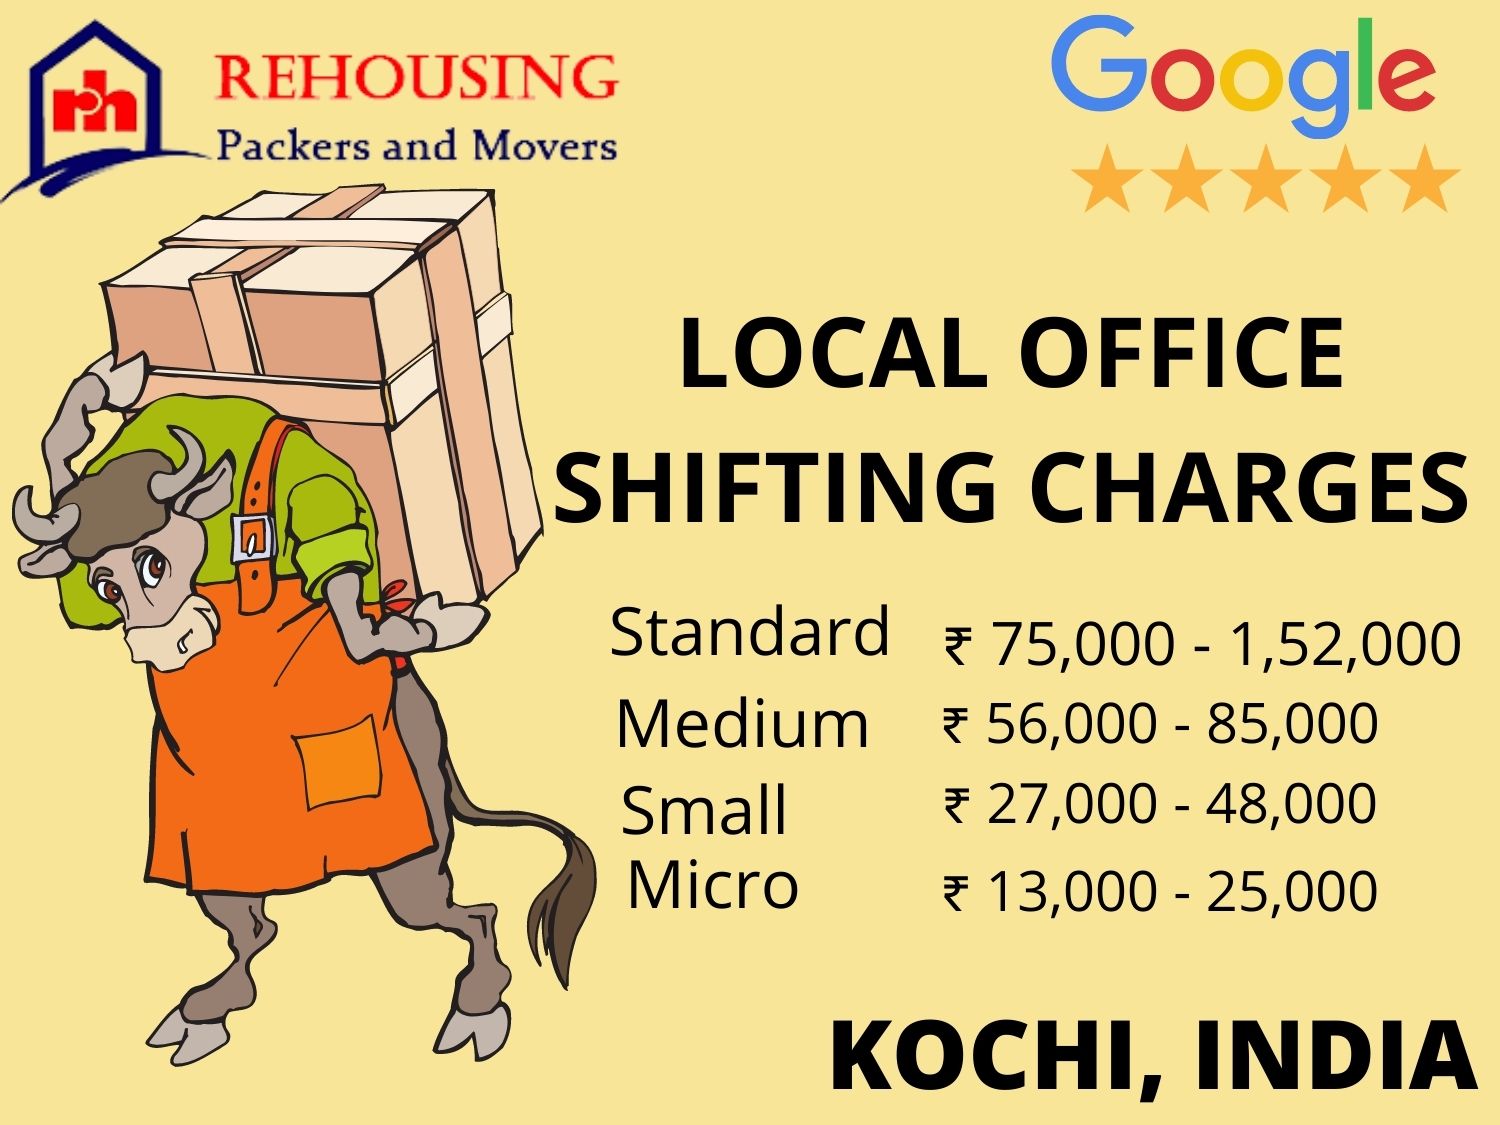 packers and movers charges in Kochi are between Rs 1,000 and Rs 3,000 for transportation